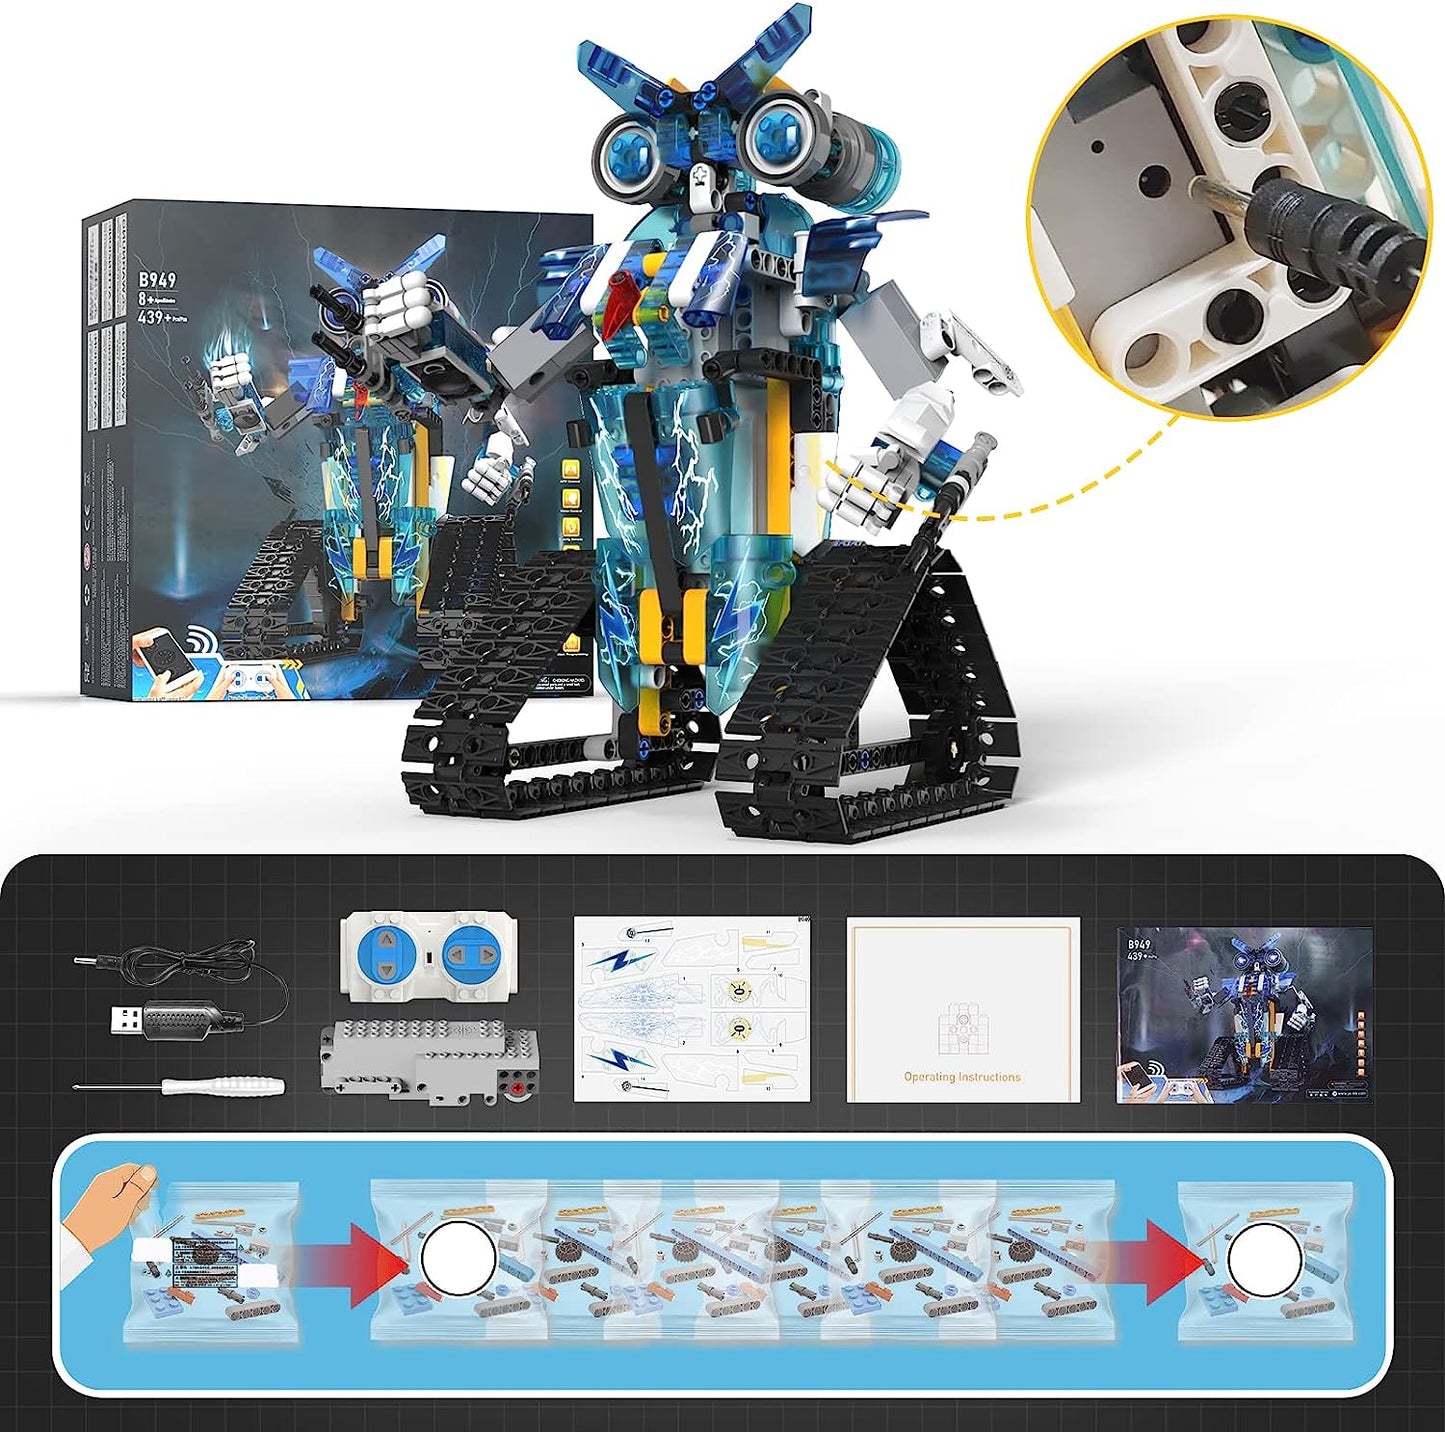 Robot for children with intelligent control to build in Lego-type blocks